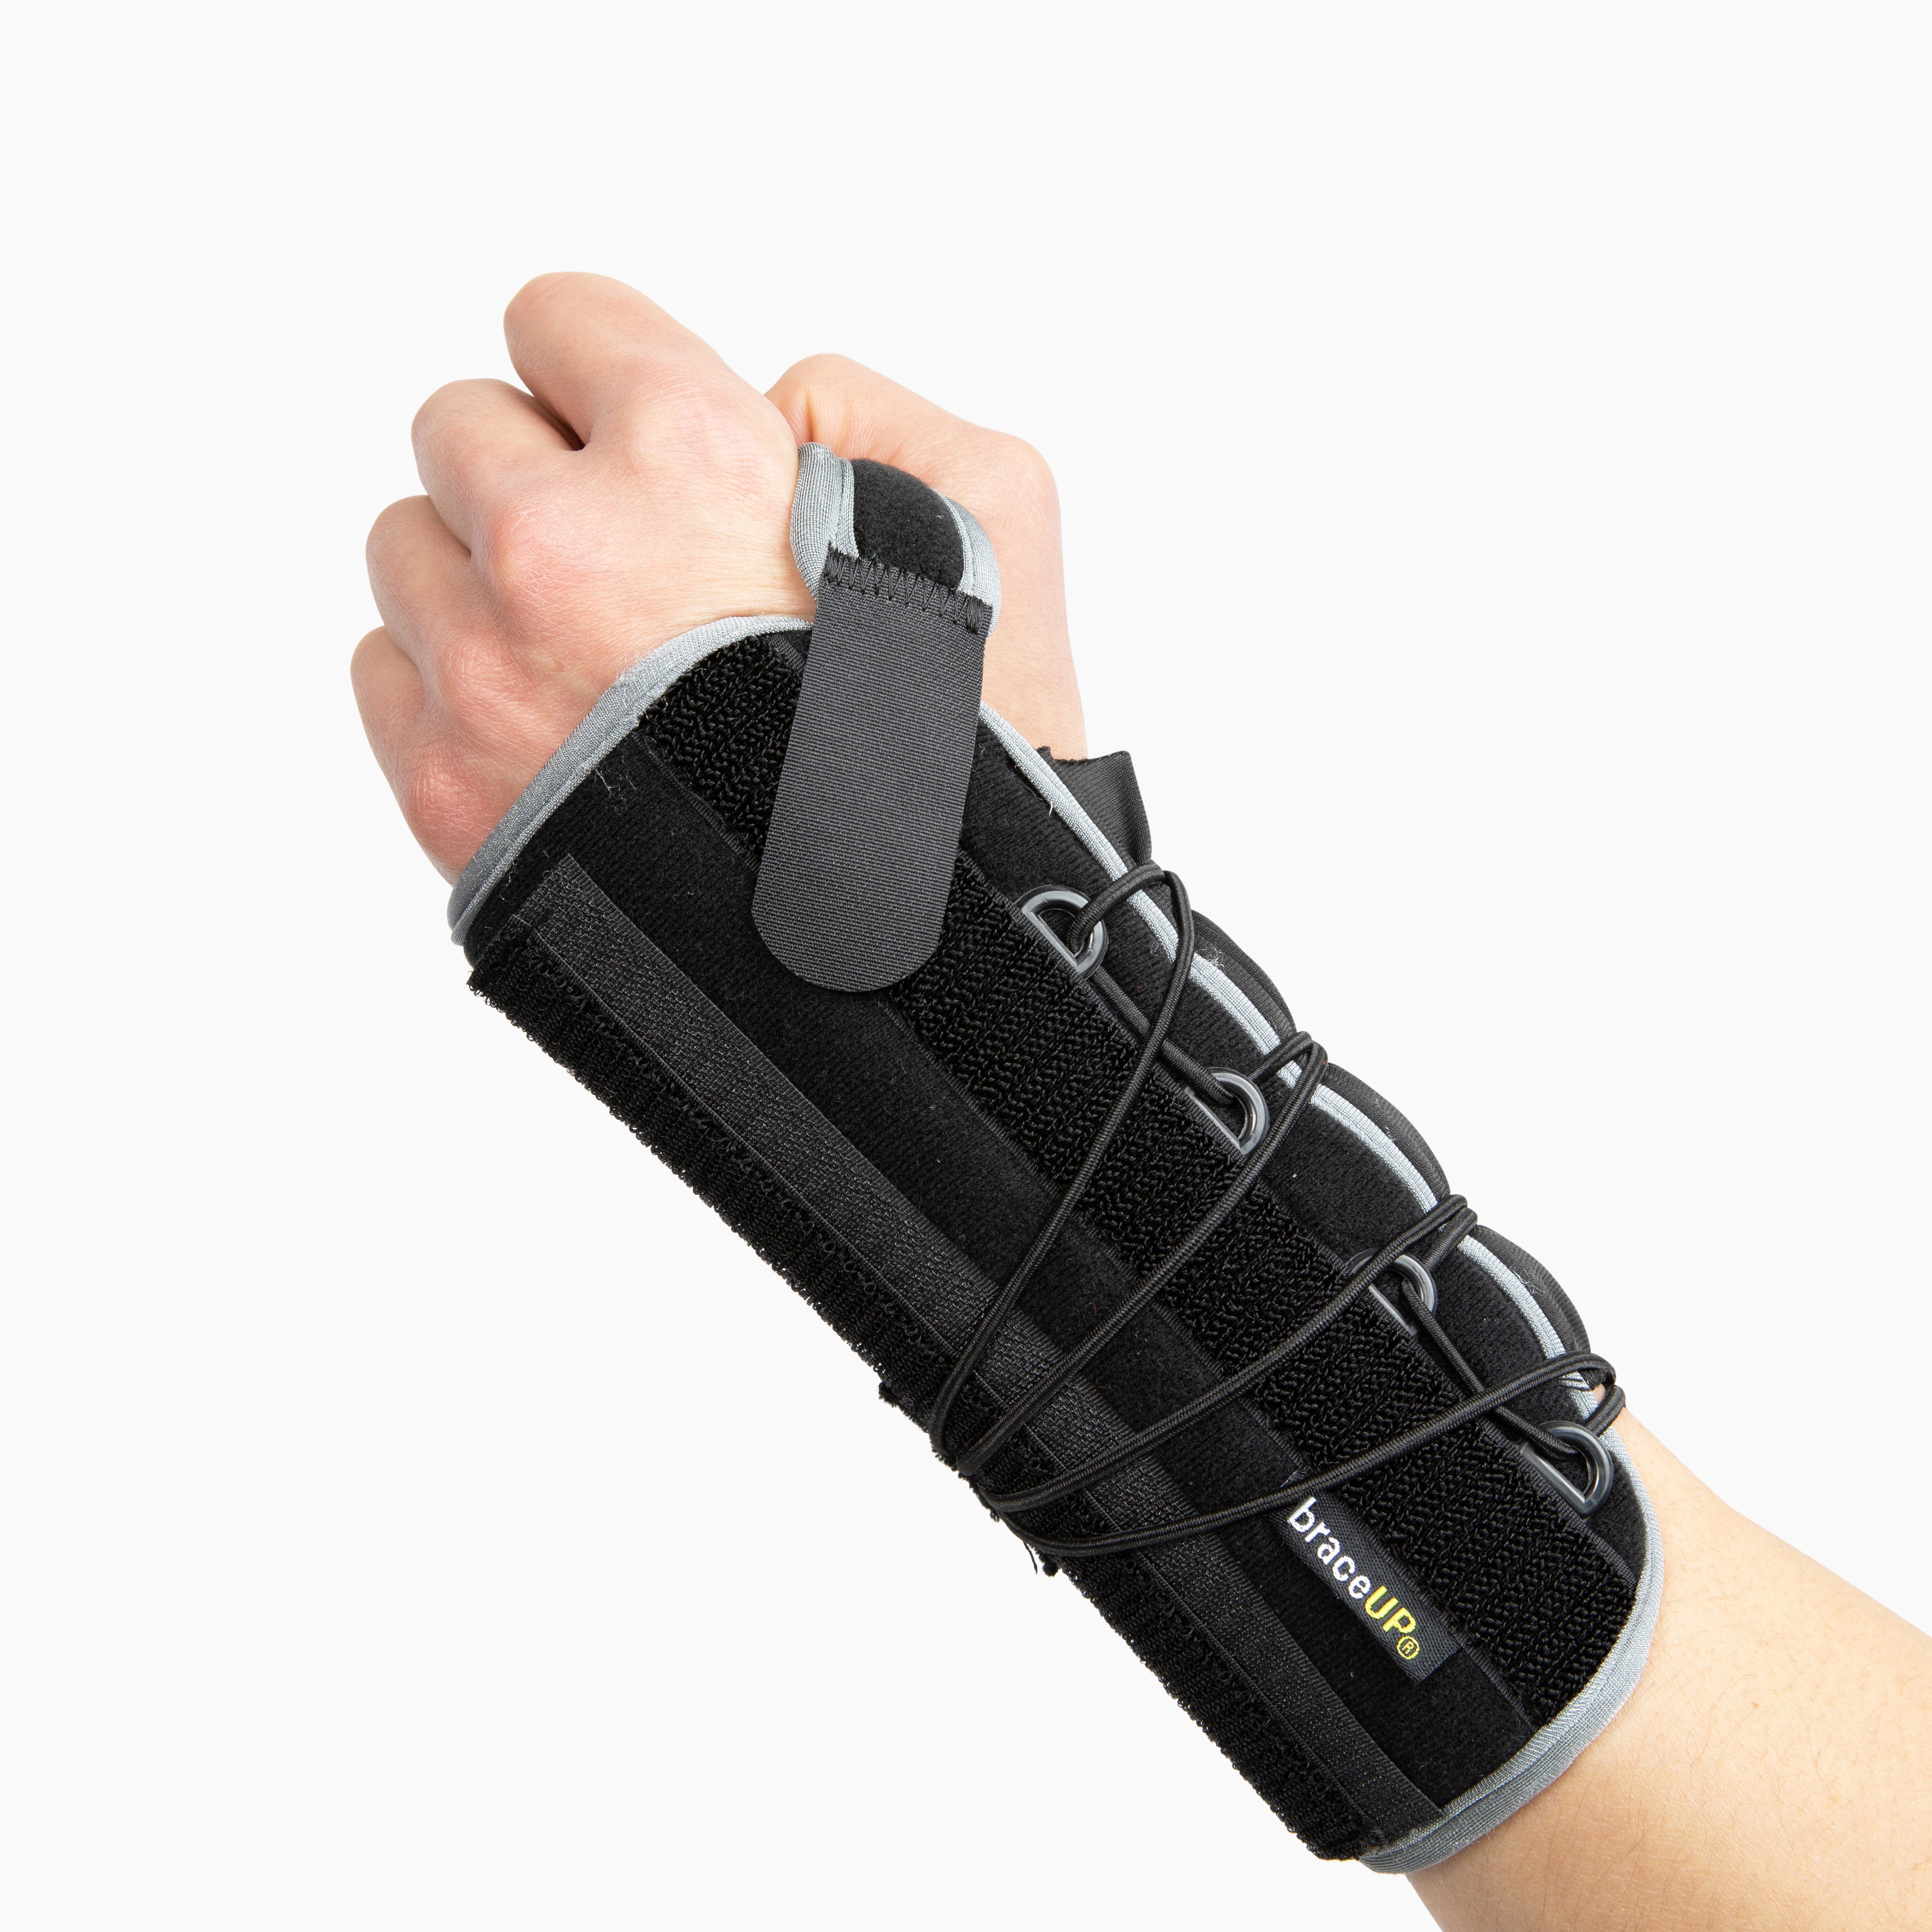 GROOFOO 1 Pair Carpal Tunnel Wrist Brace, Wrist Support Wrap for